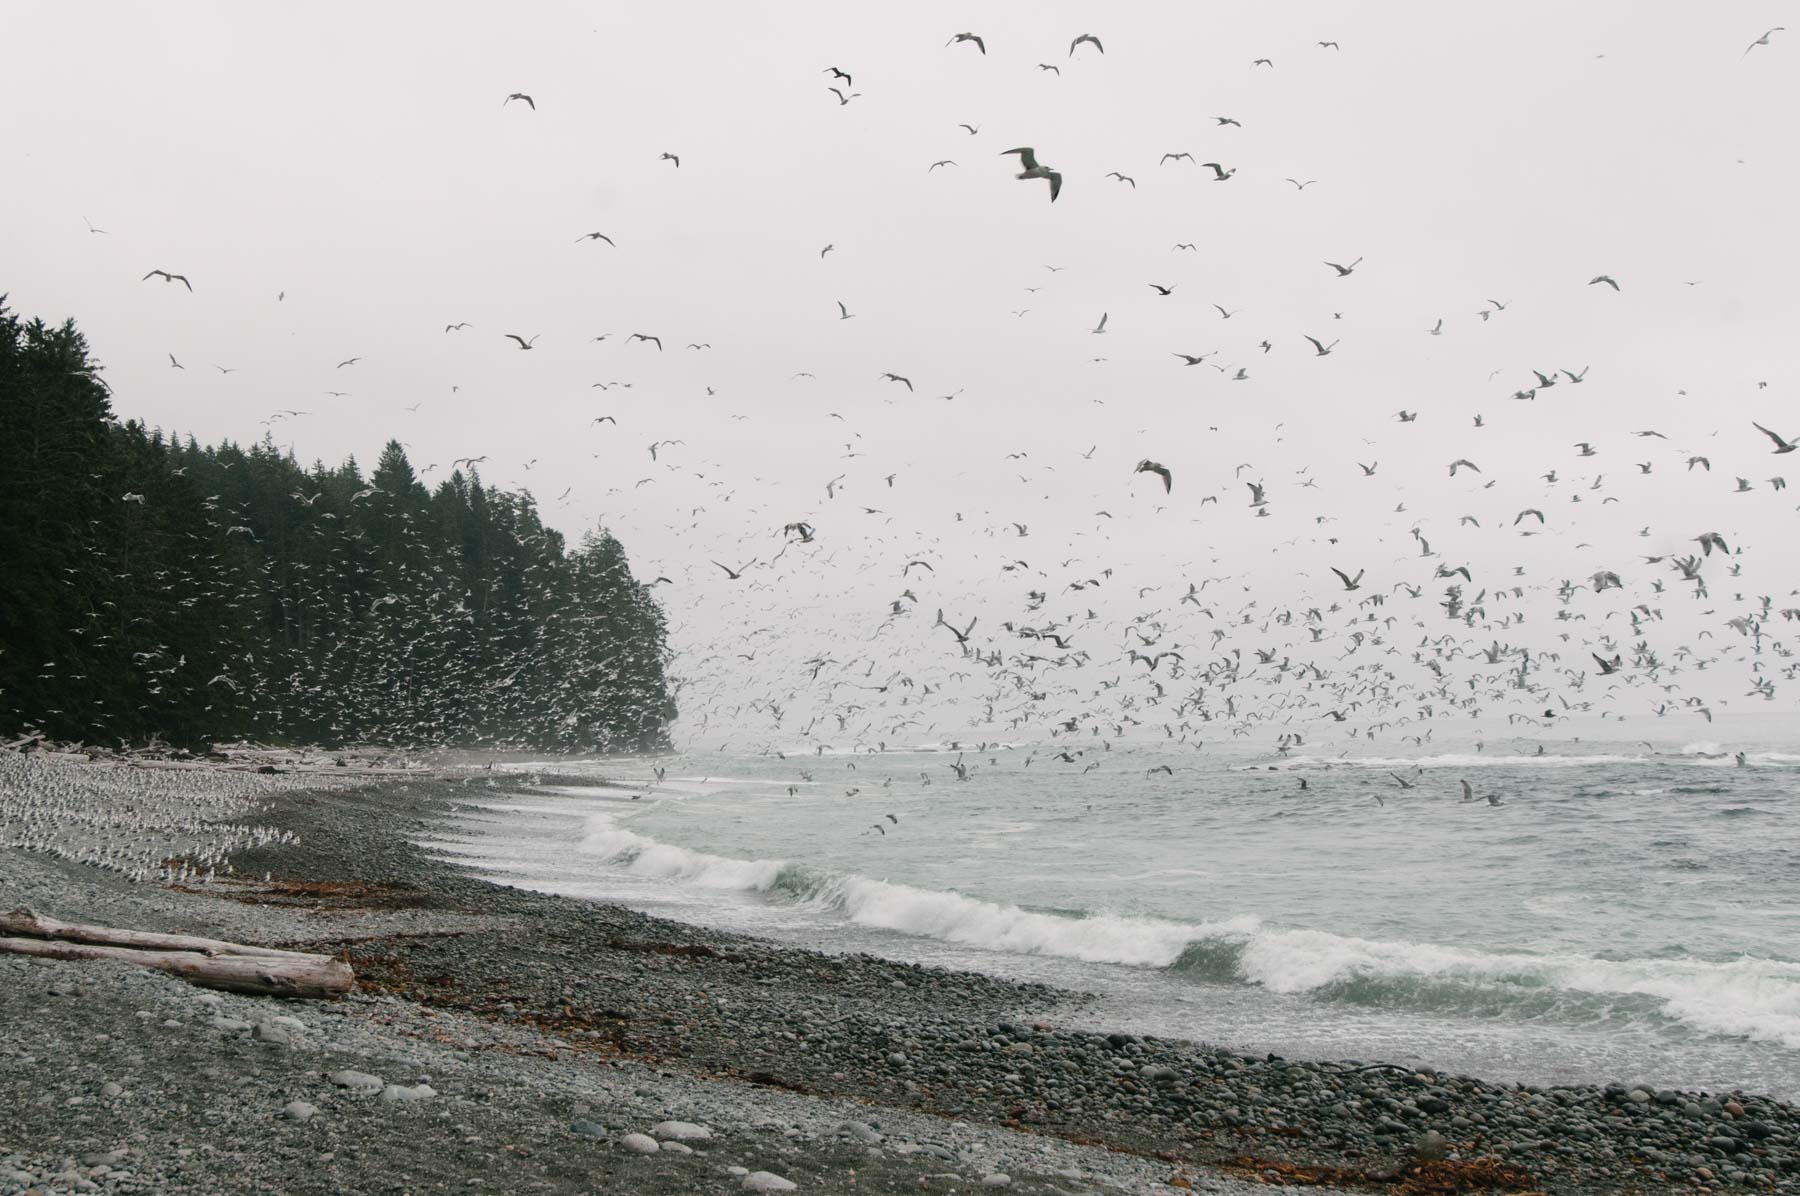 Thick clouds of seagulls rising from the rocky beaches of Vancouver Island